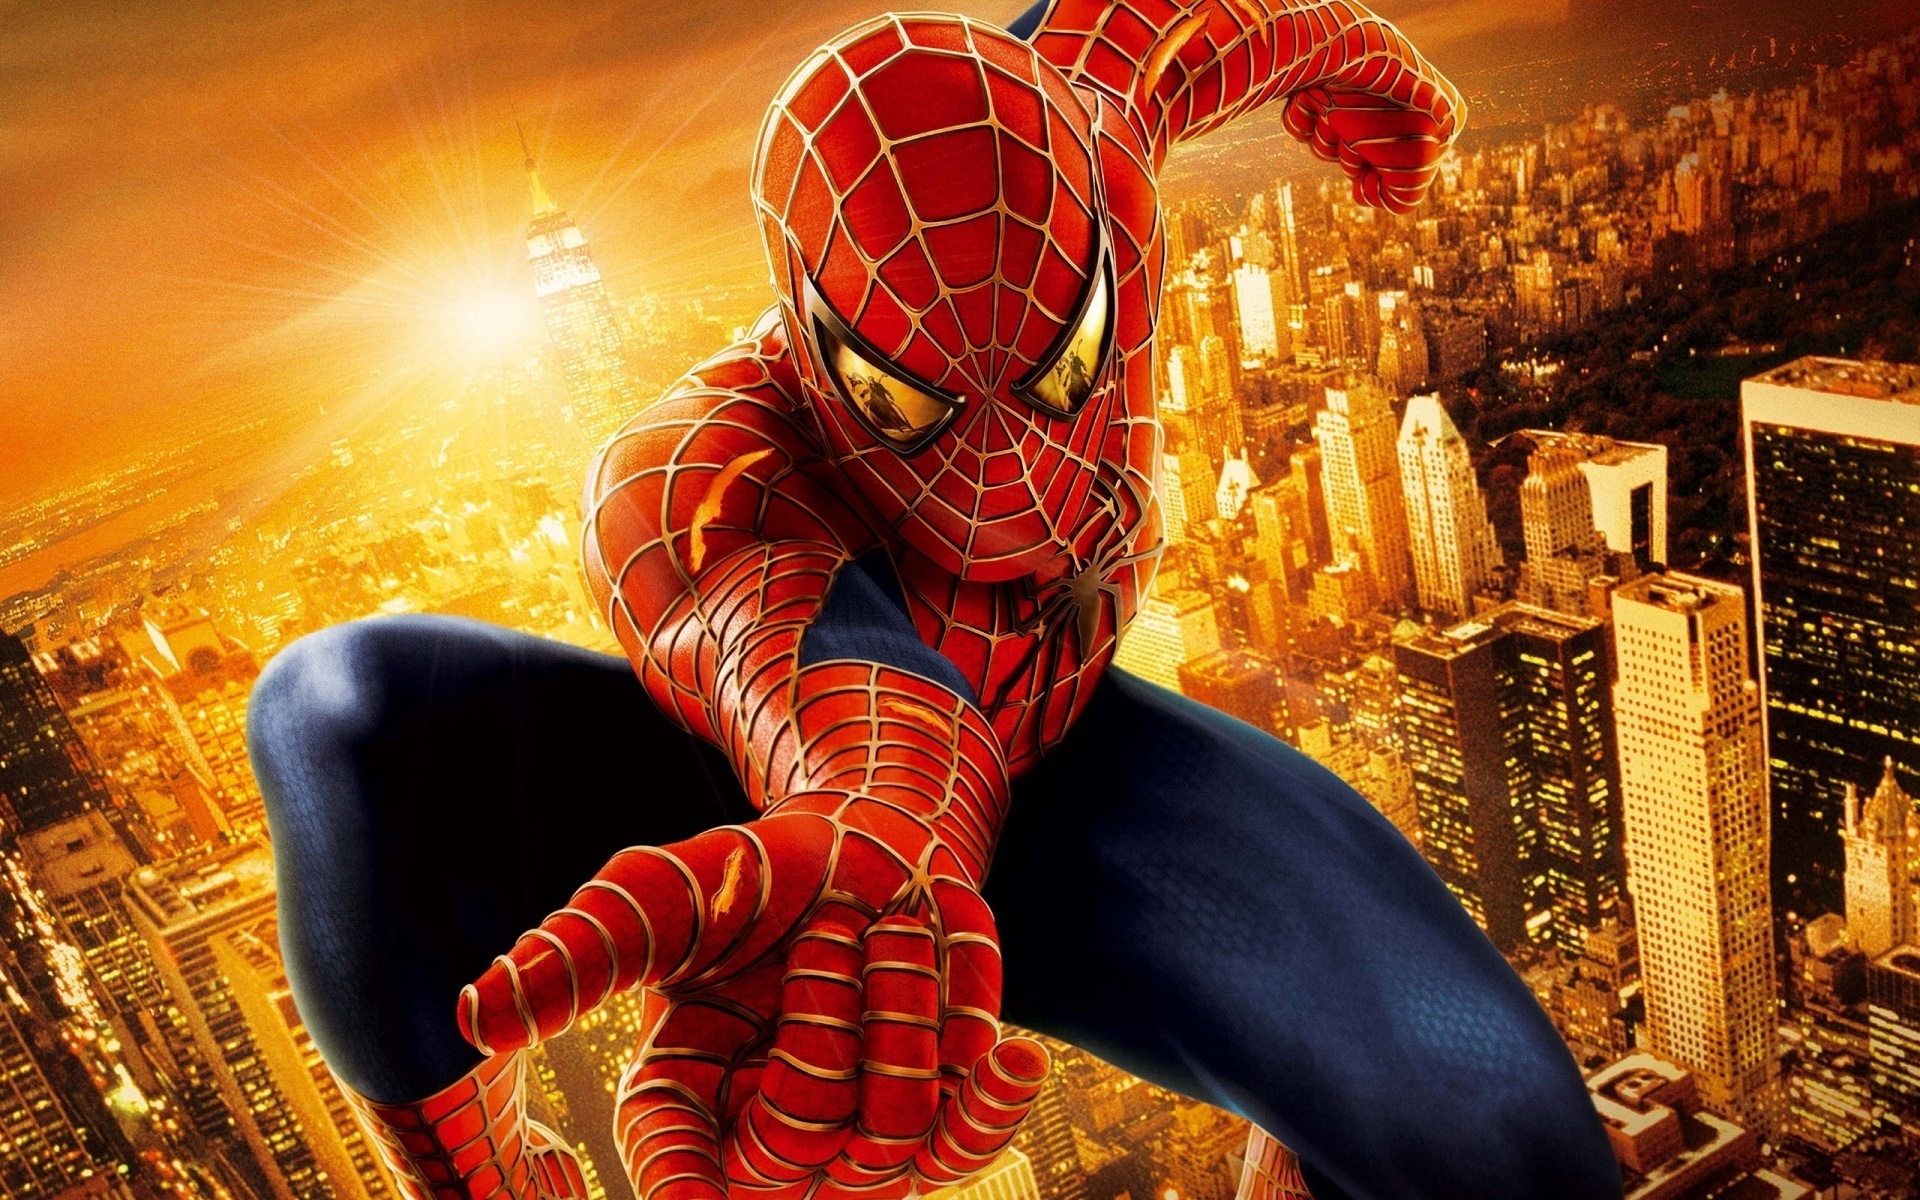 Spiderman Up for 1920 x 1200 widescreen resolution